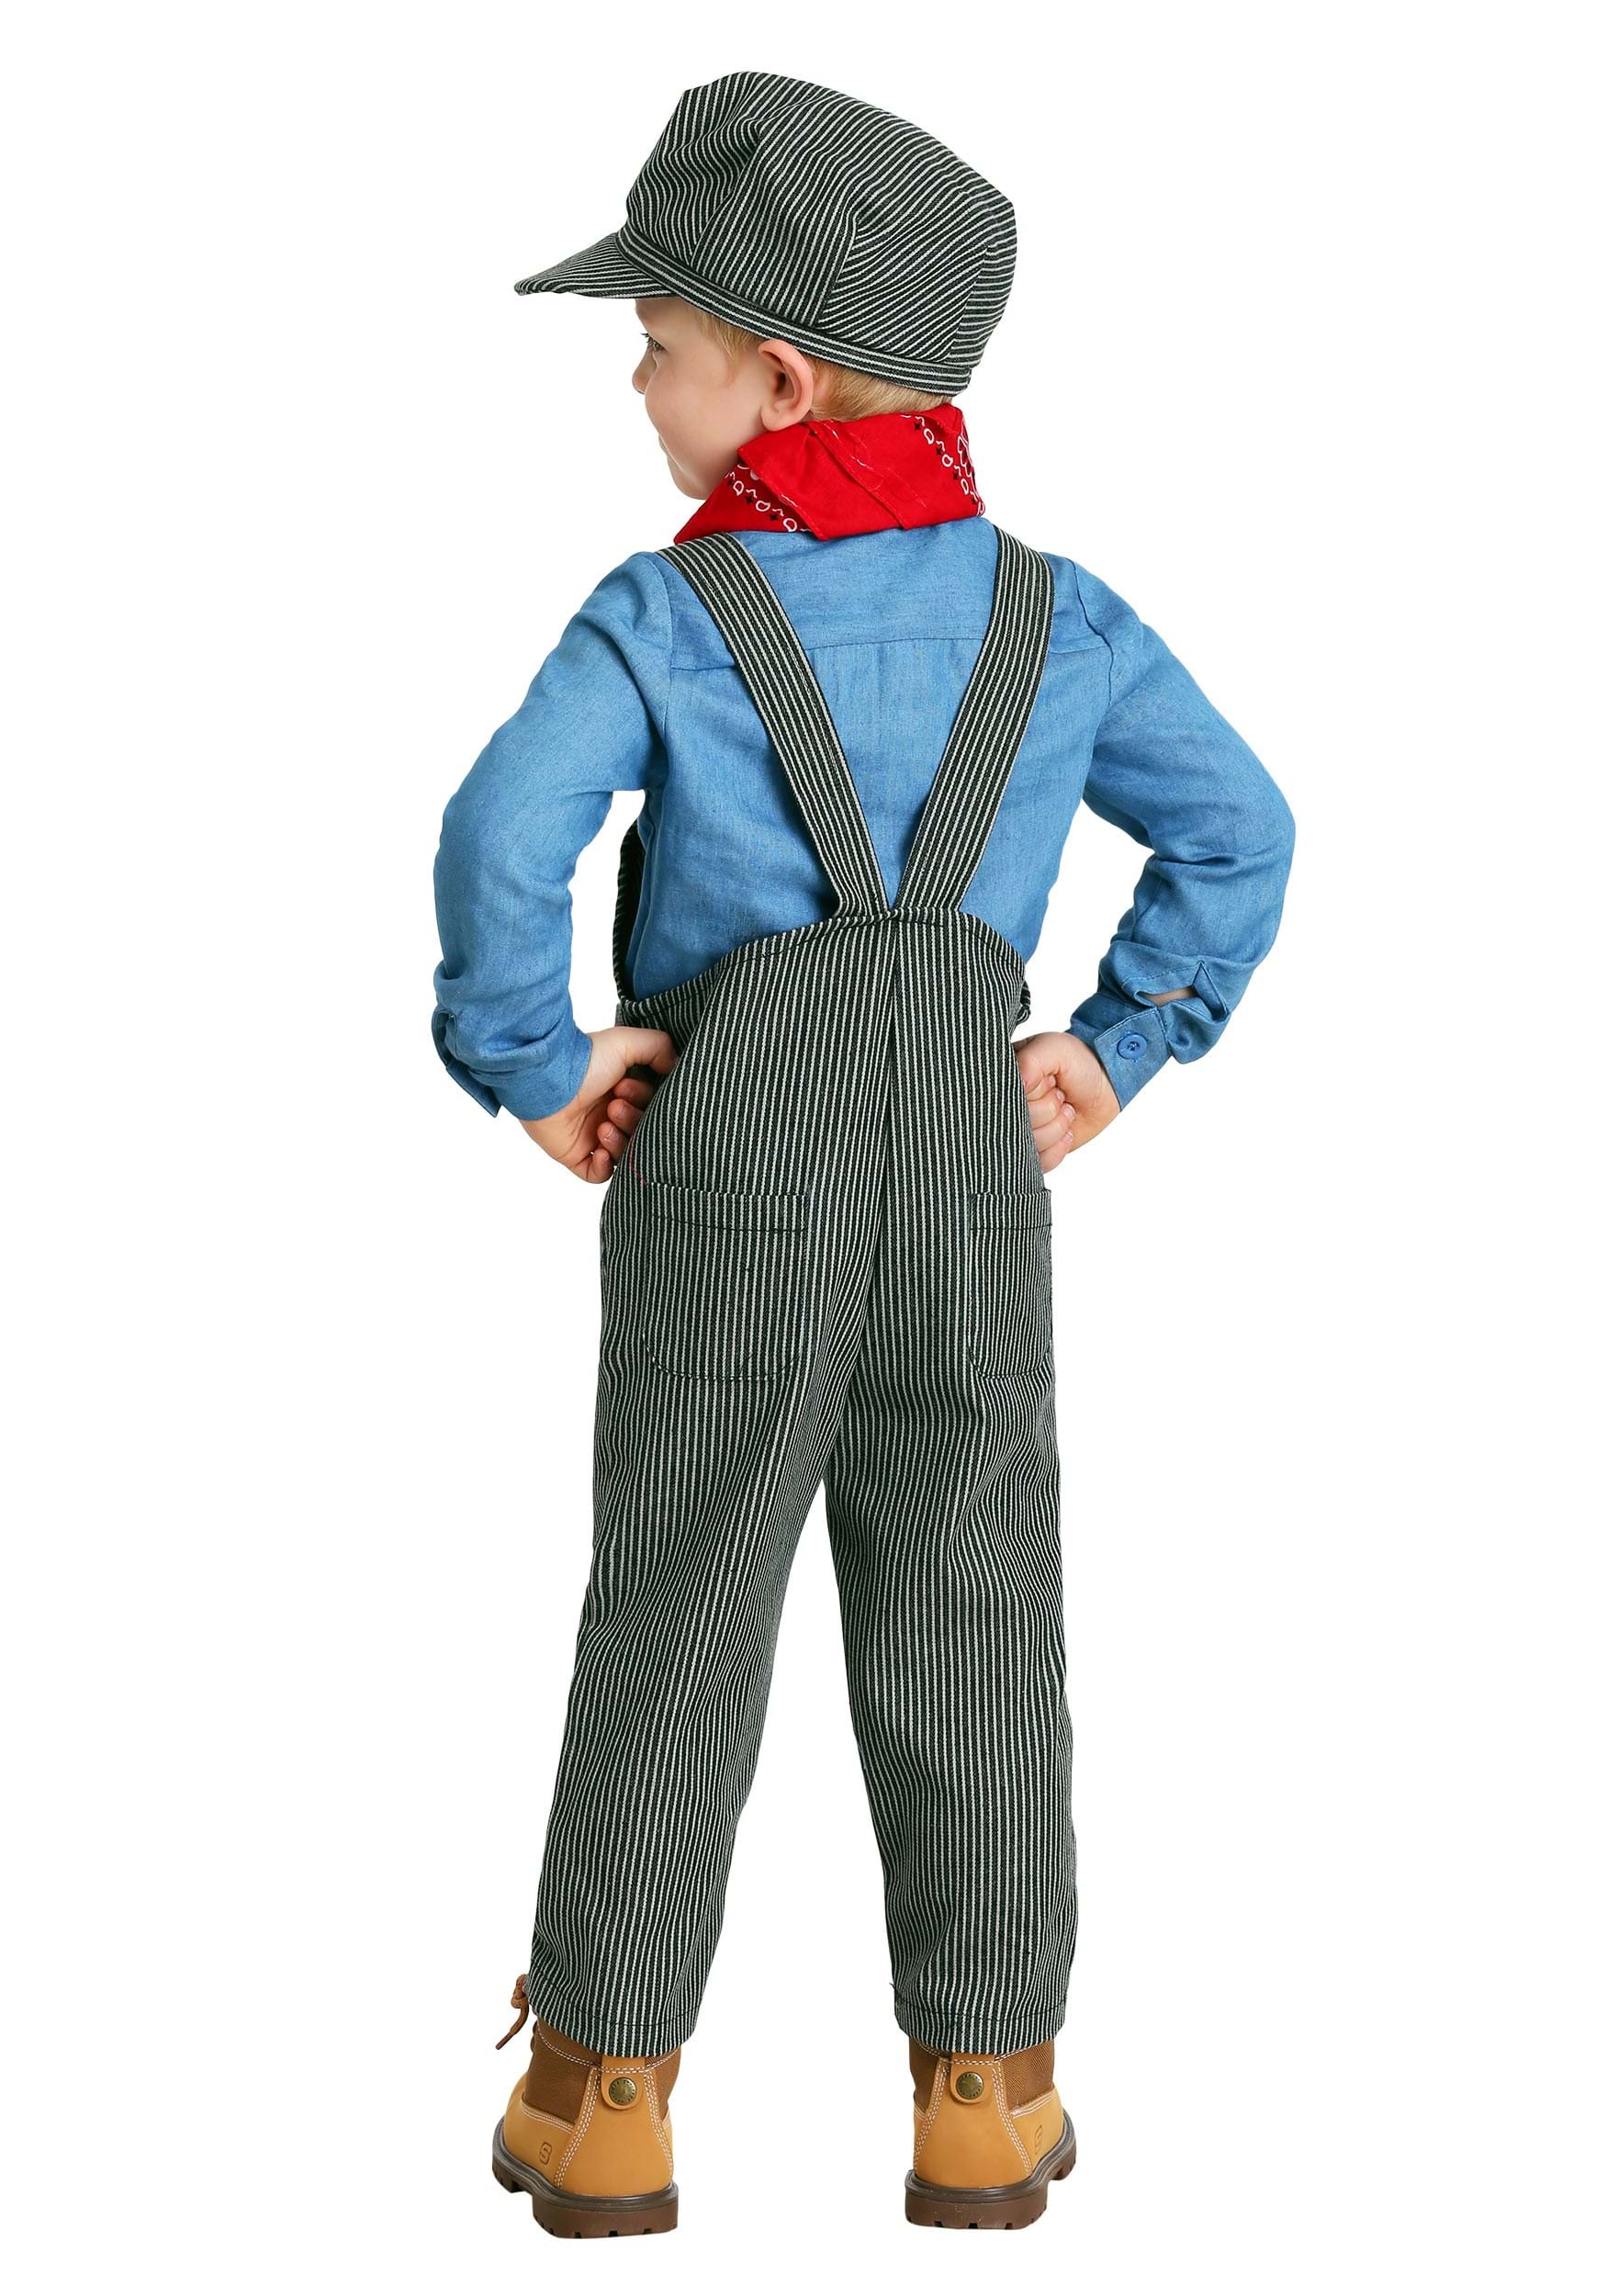 Train Engineer Costume For Toddler